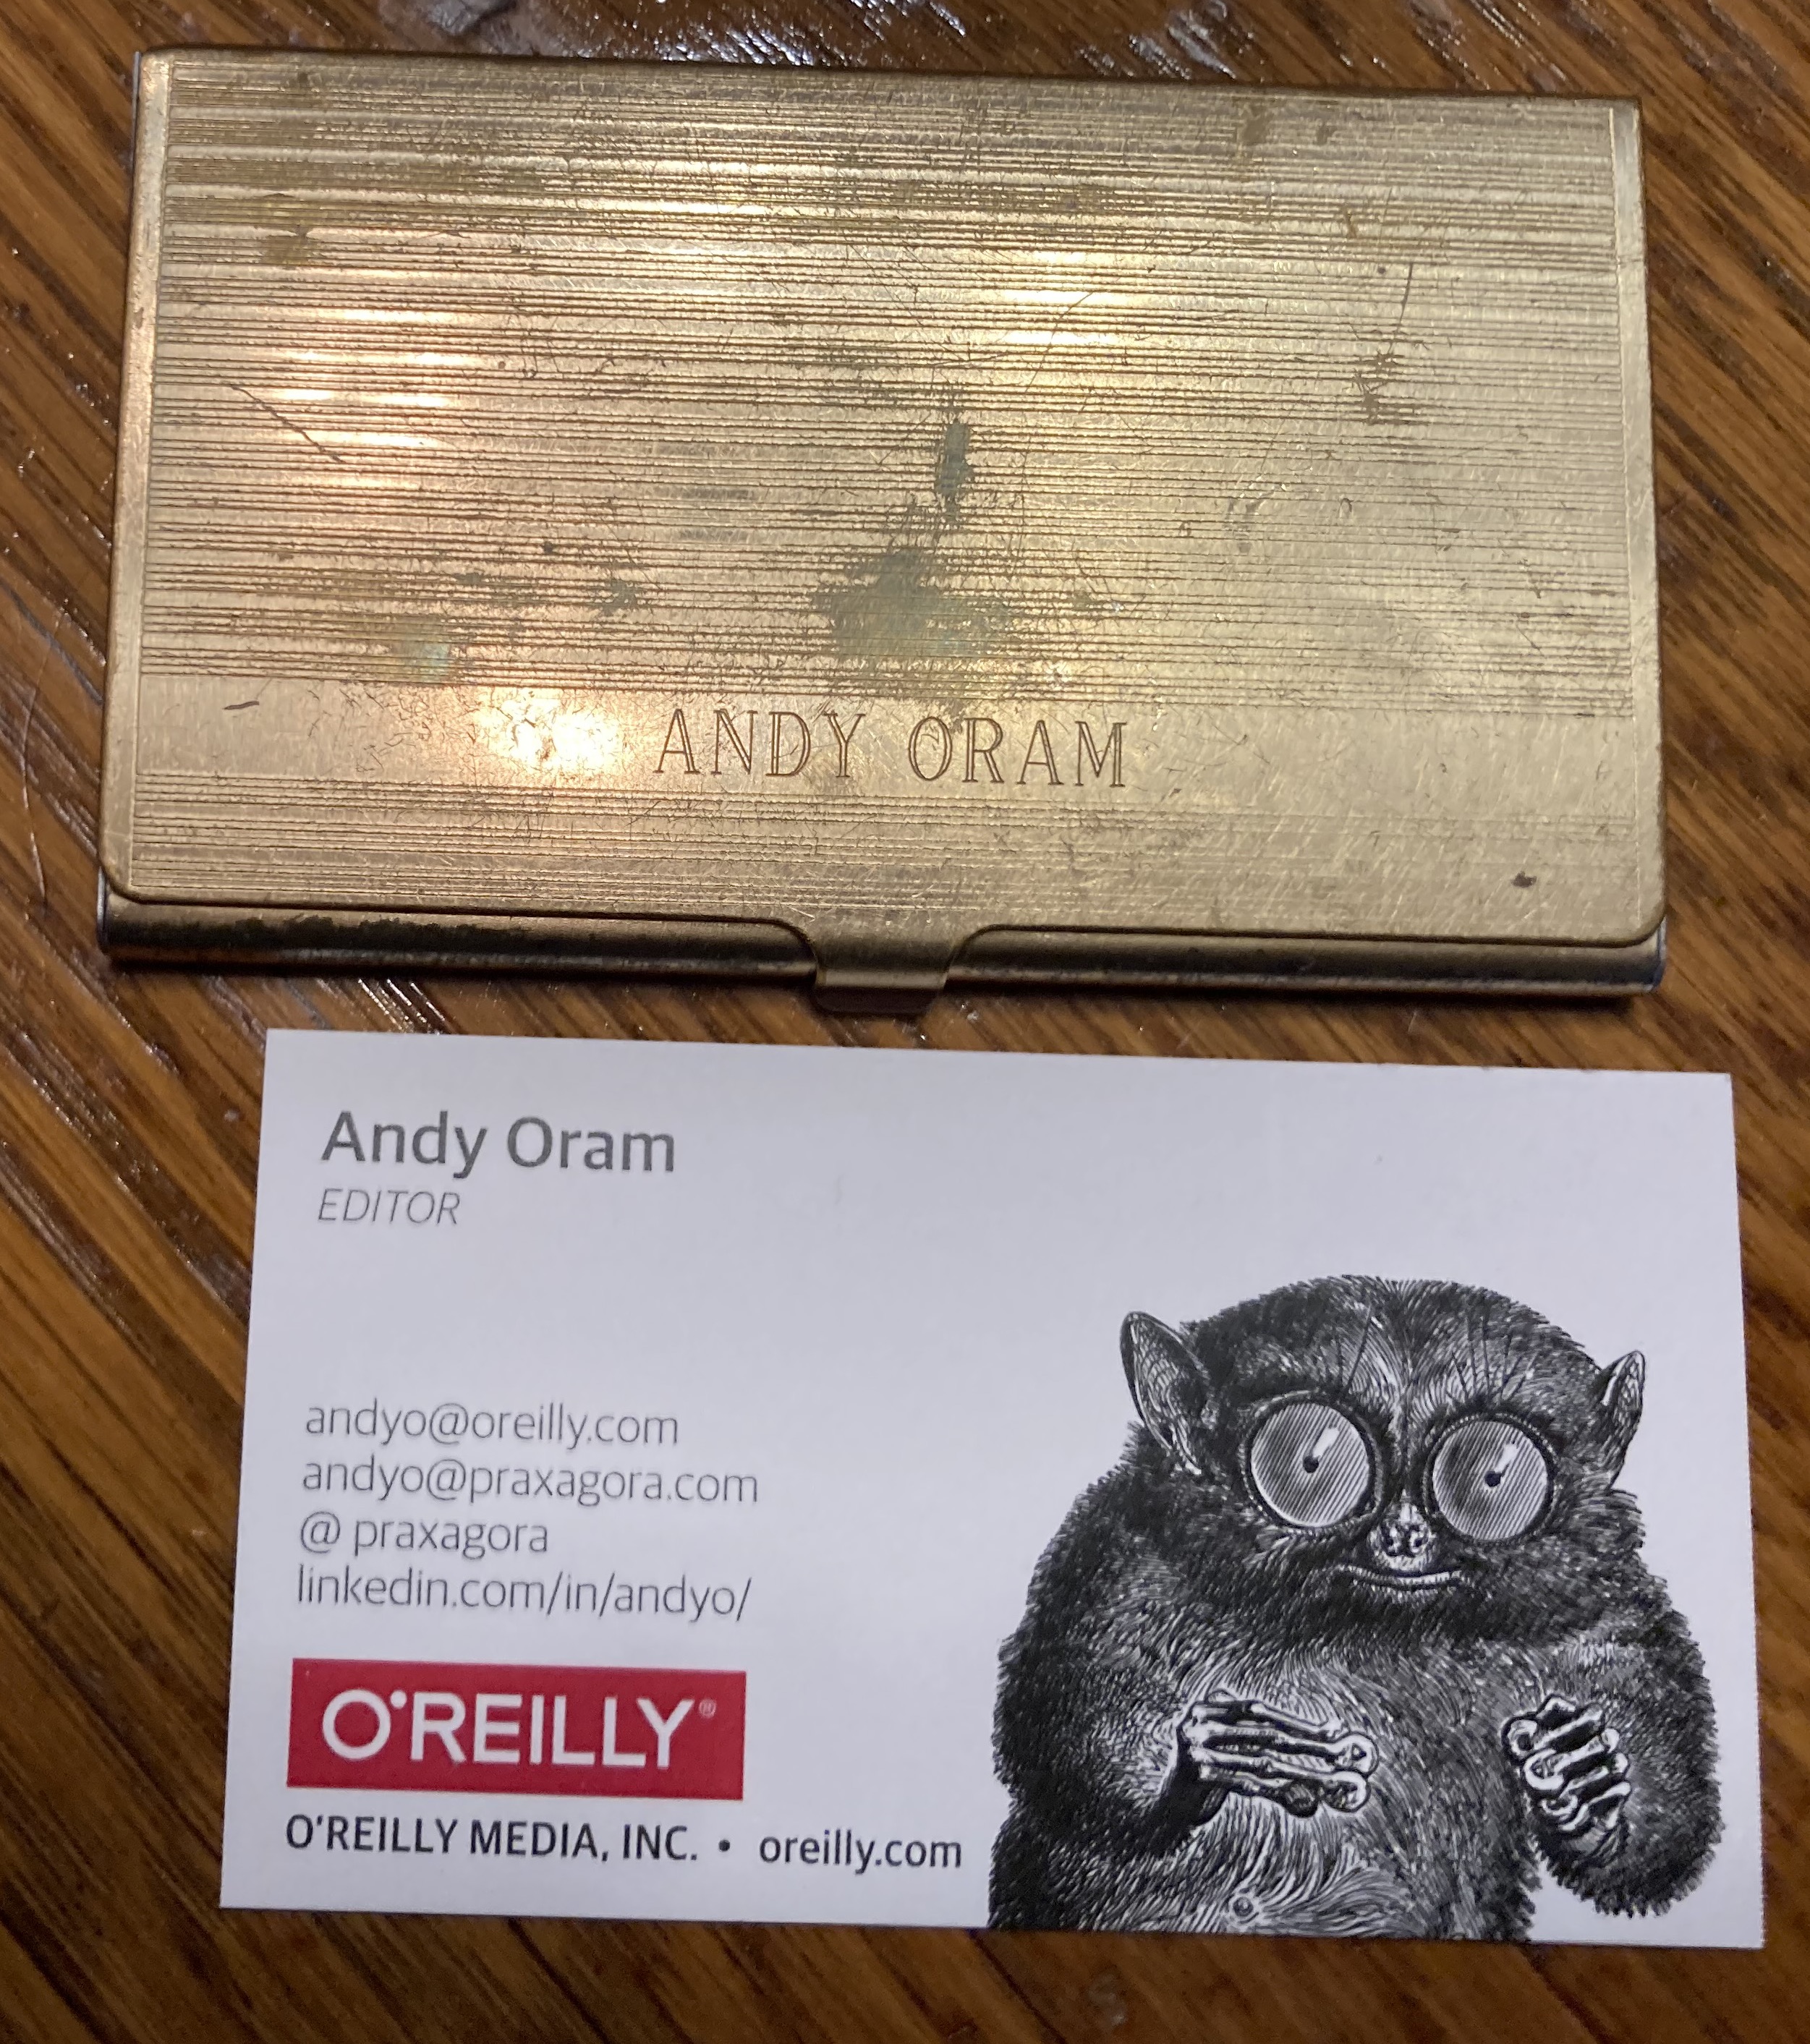 Photo of a typical O'/Reilly business card and my personalized card case